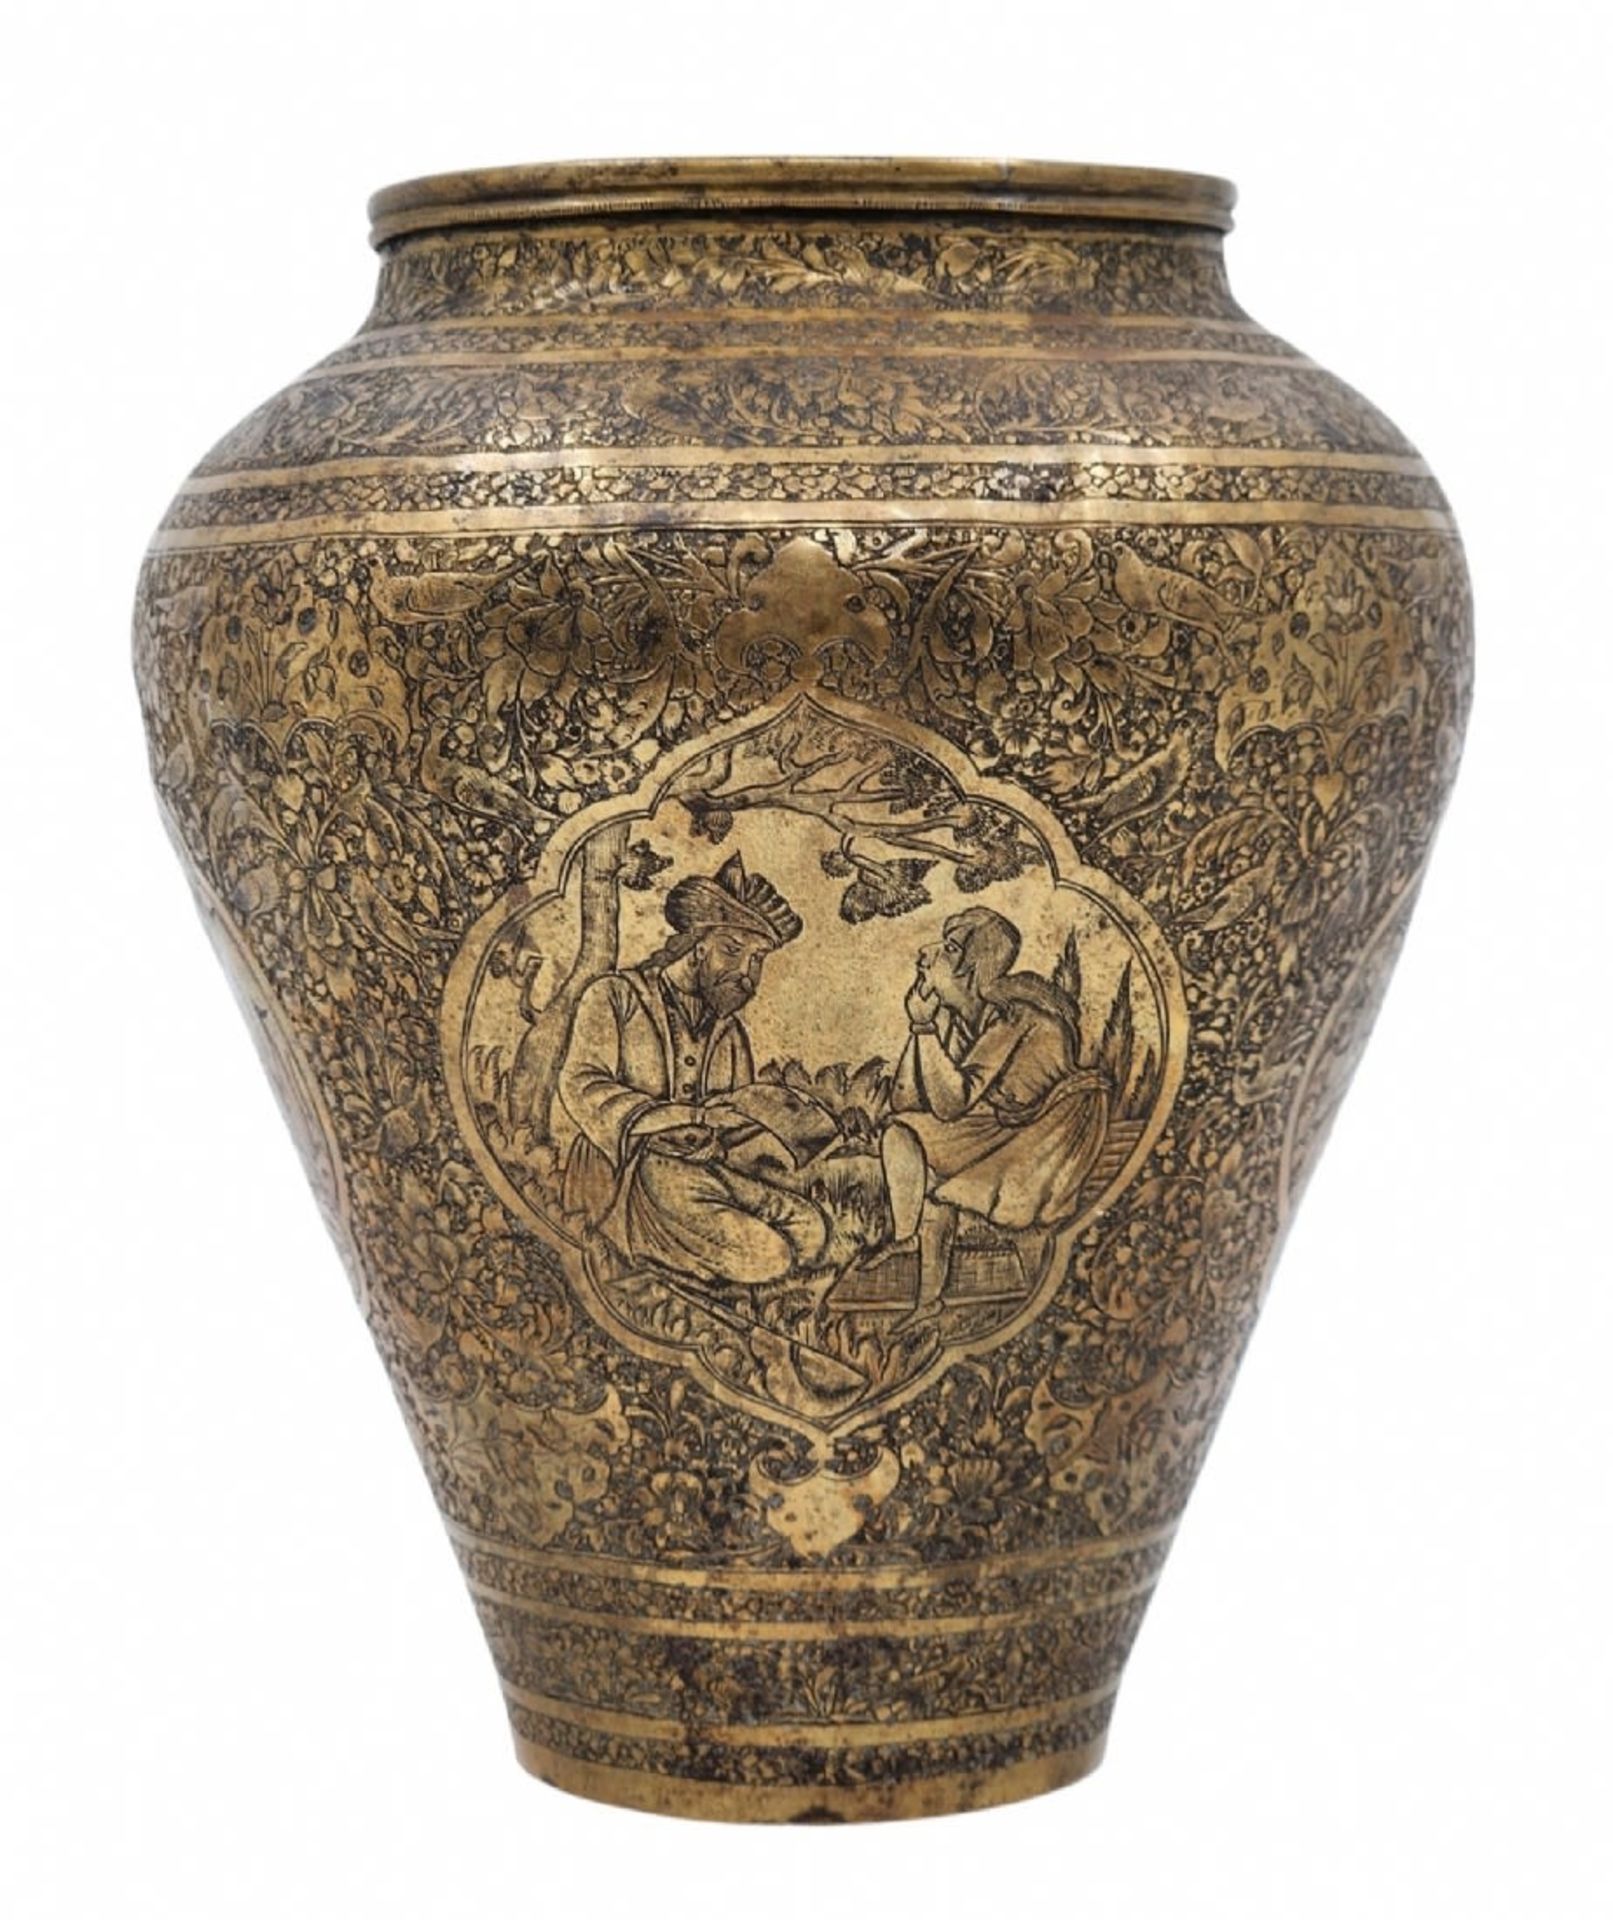 An antique Persian urn, an urn from the 19th century, made of brass and decorated with delicate - Bild 2 aus 5